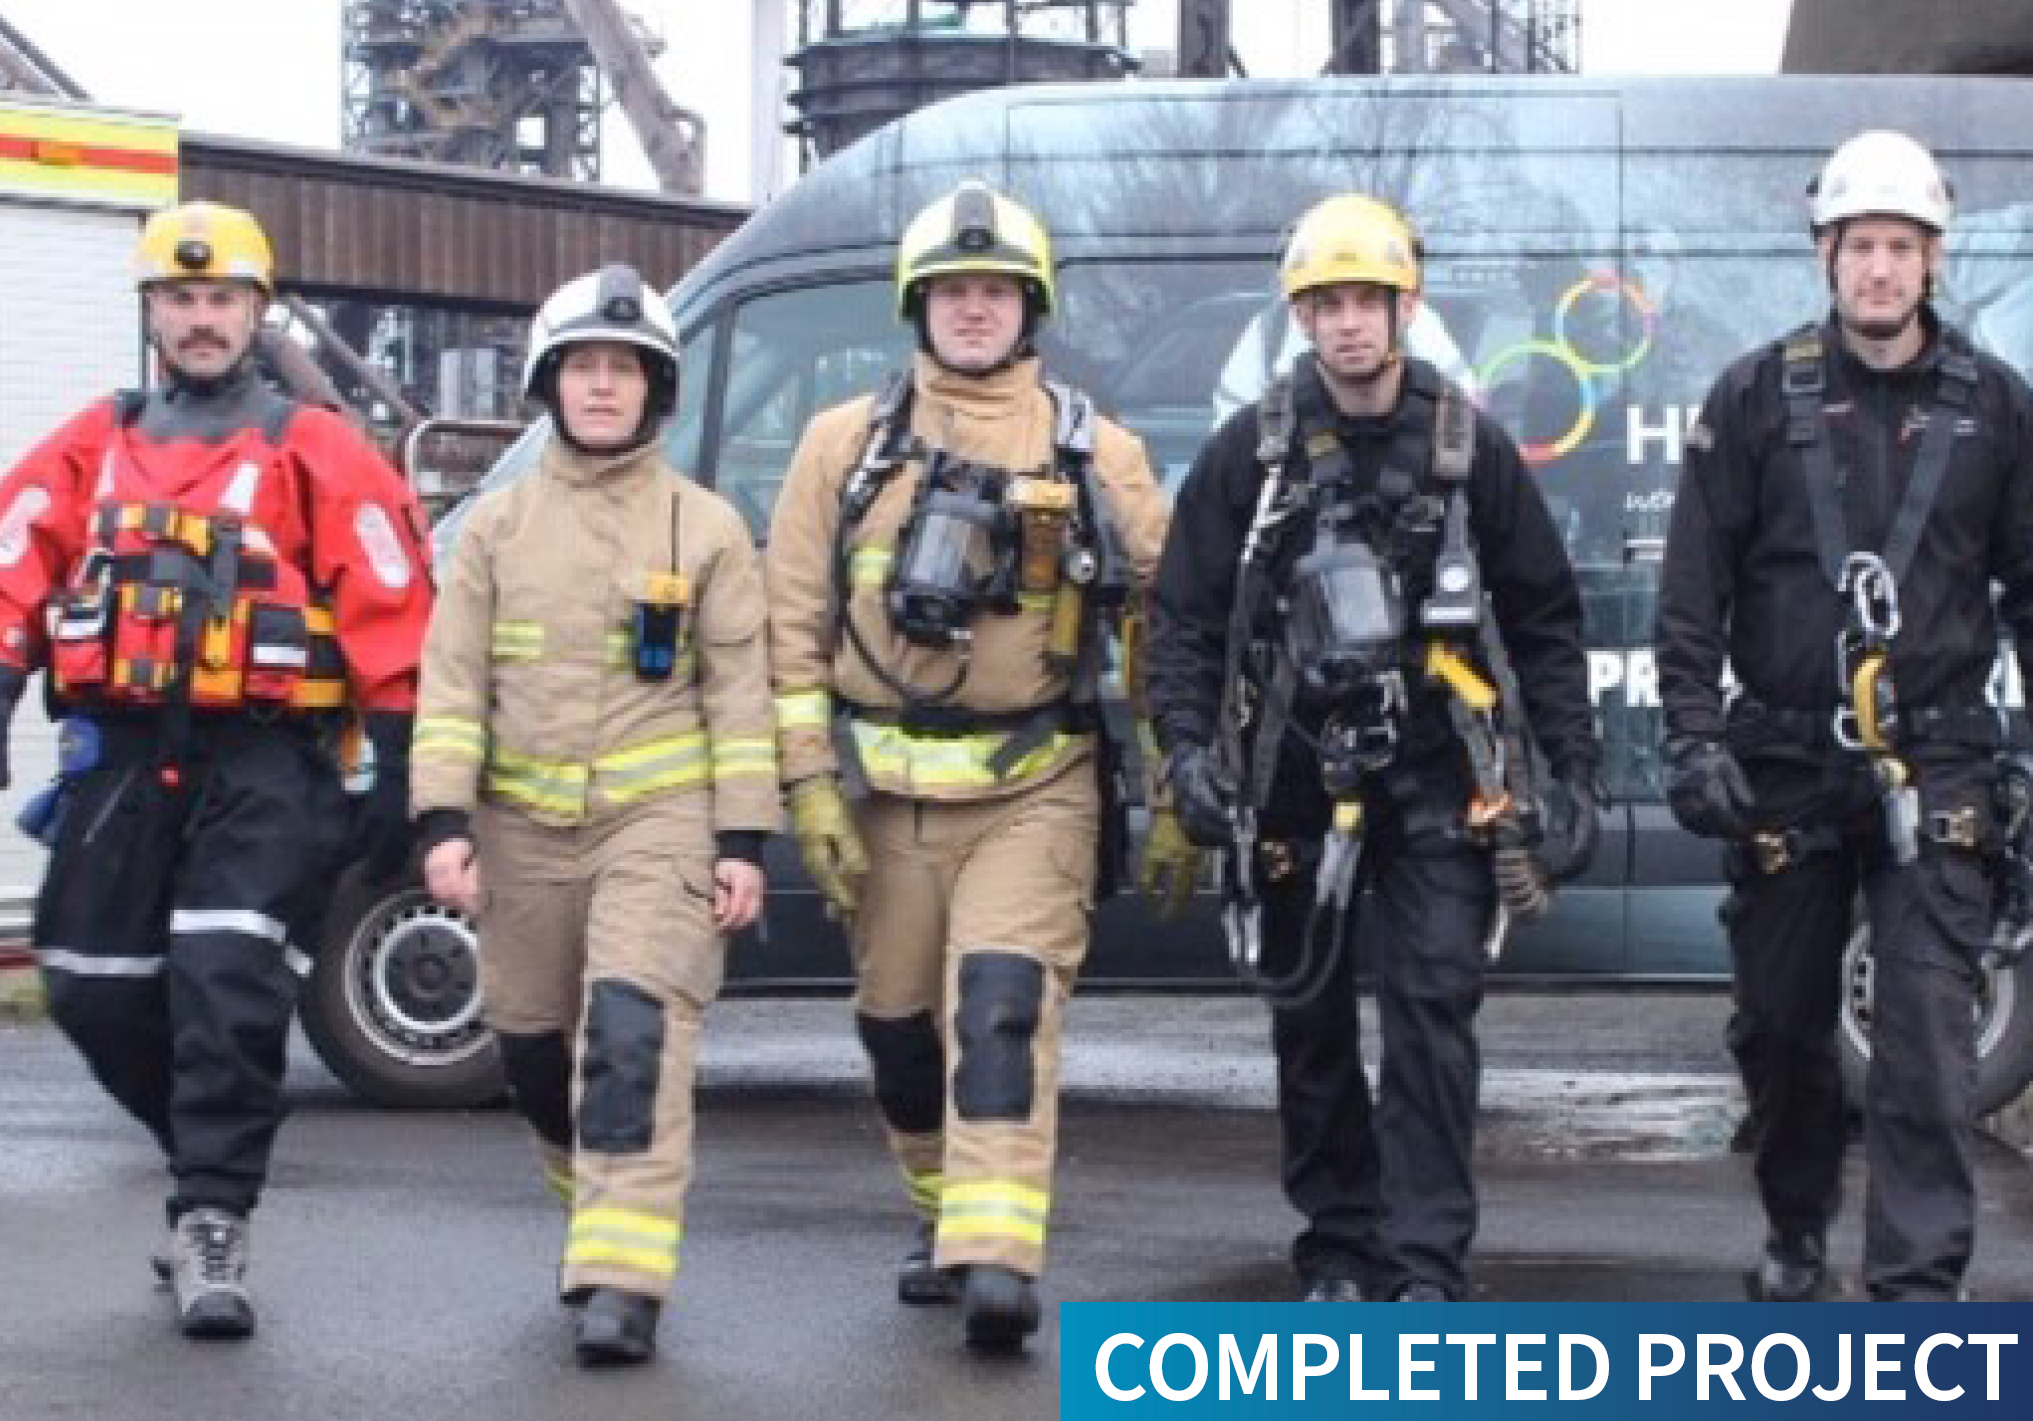 Humberside Fire and Rescue Solutions personnel in uniform in front of a liveried vehicle with the text Completed Project